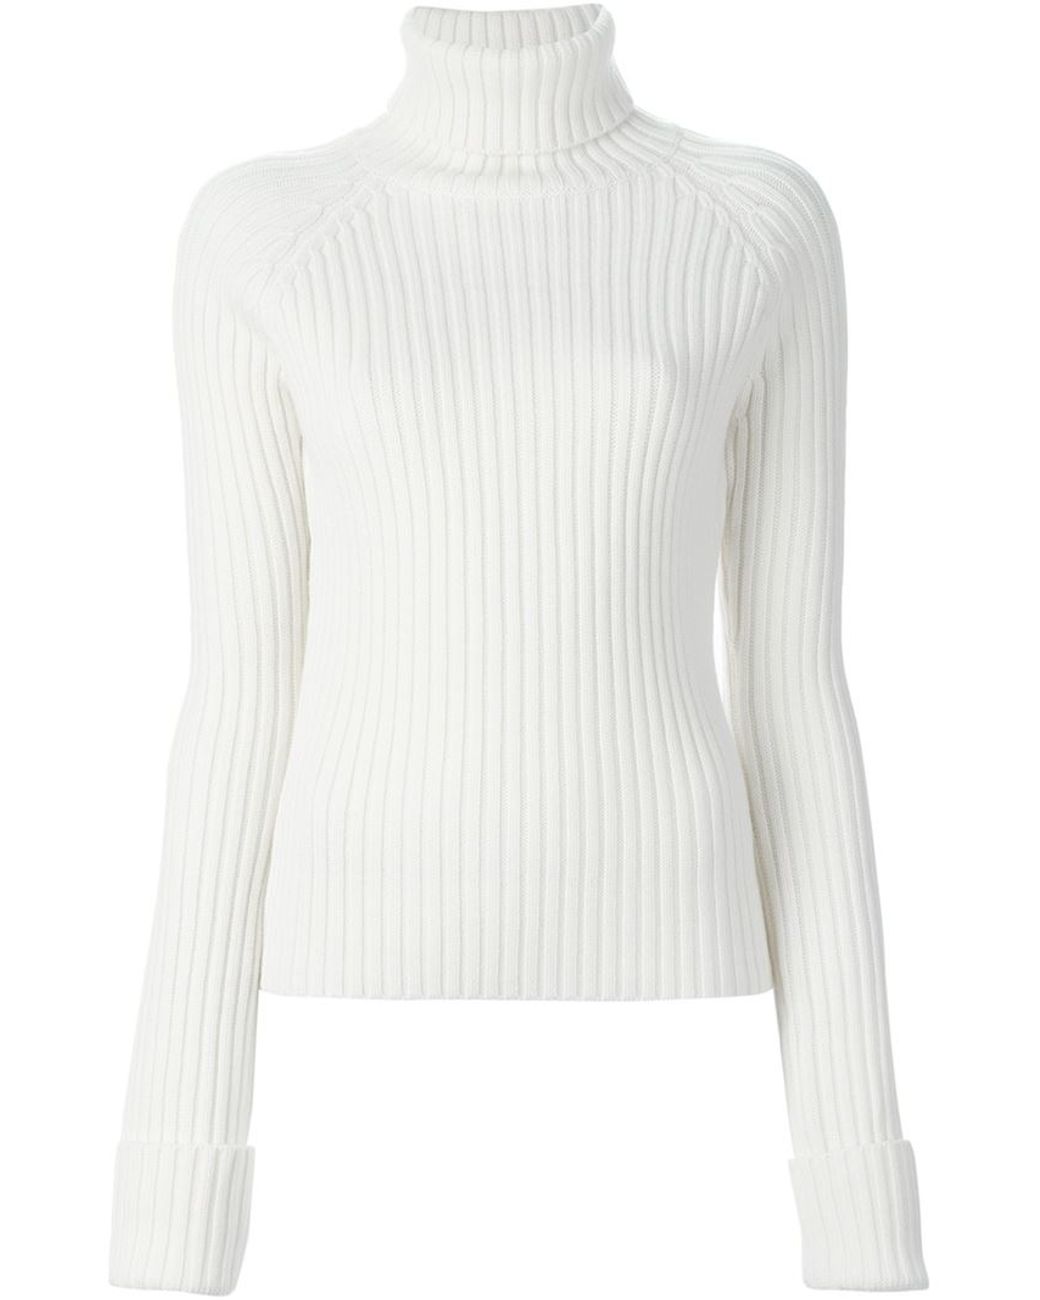 JOSEPH Ribbed Turtleneck Sweater in White | Lyst